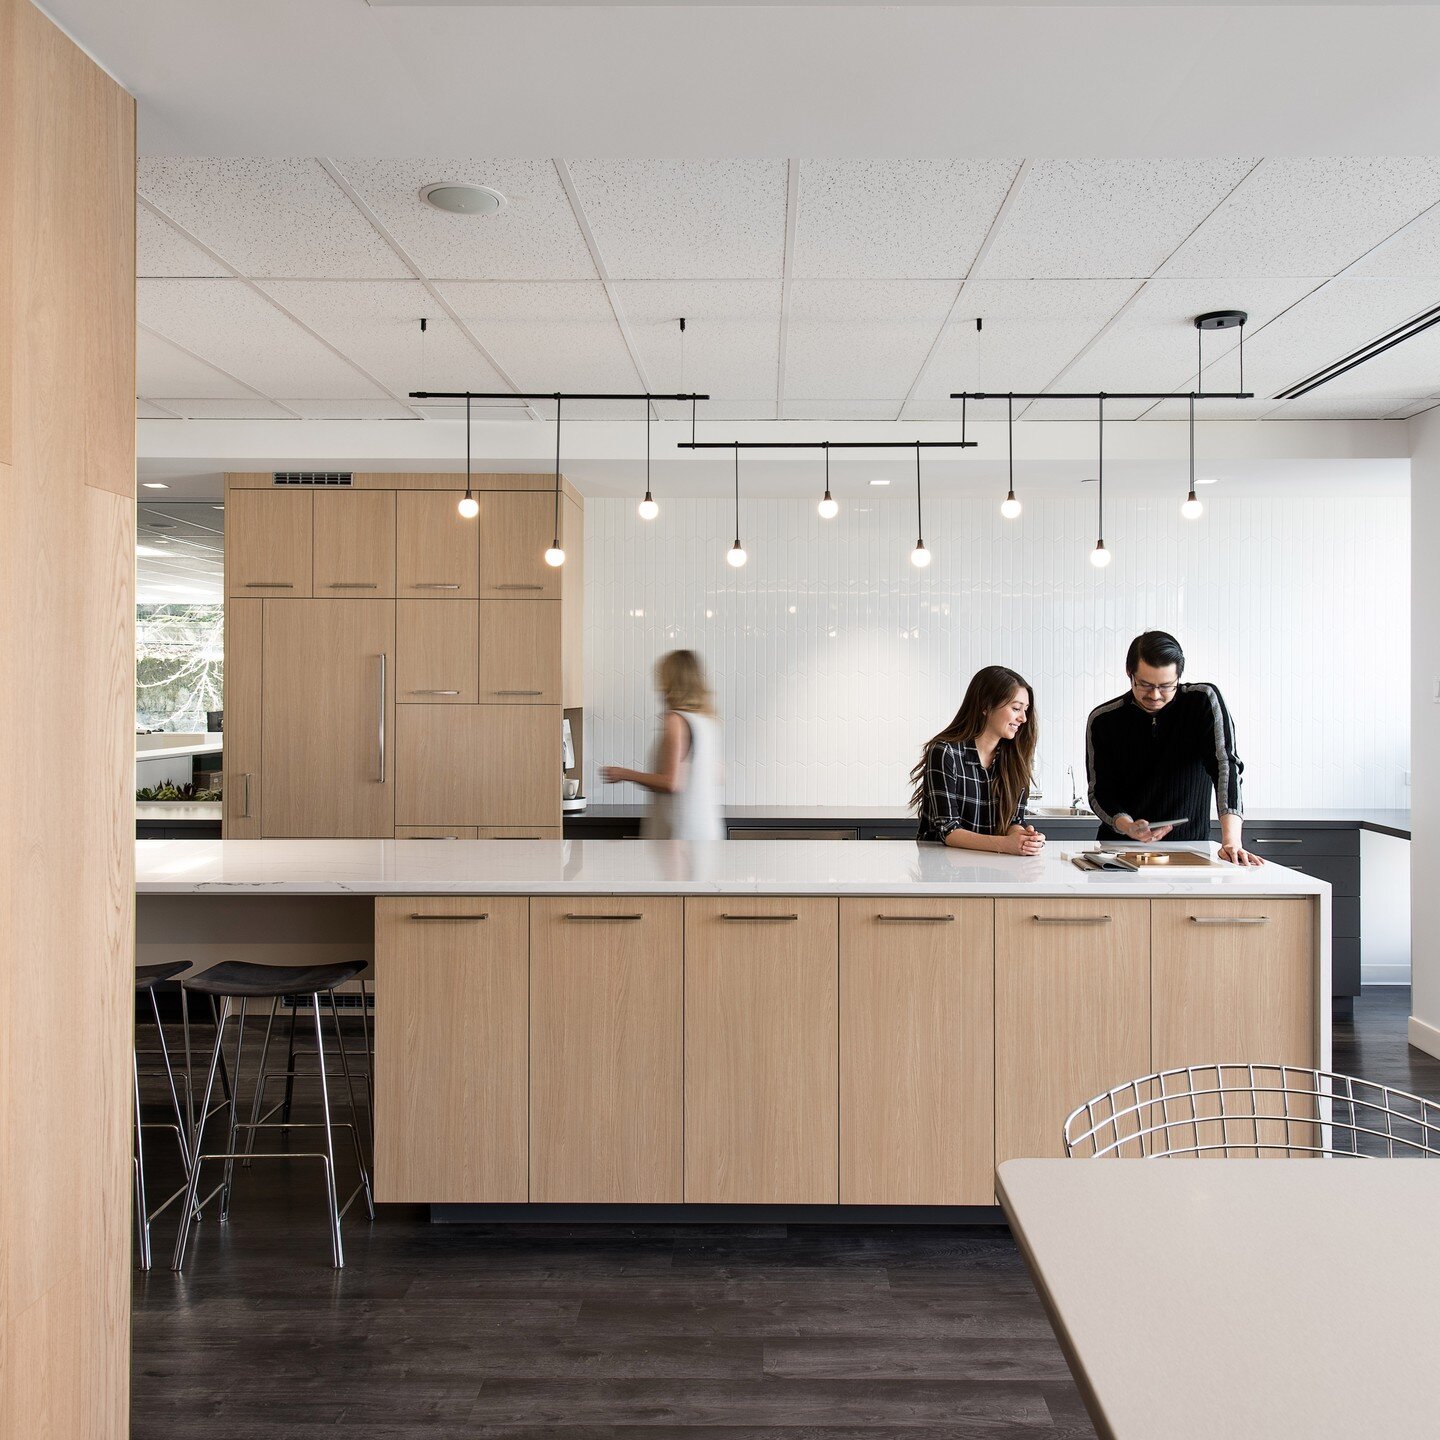 SSDG Interiors' office in downtown #Vancouver features an open kitchen and meeting space, enabling flexibility in how and where designers can work and collaborate. 

Interior Design by @ssdginteriors